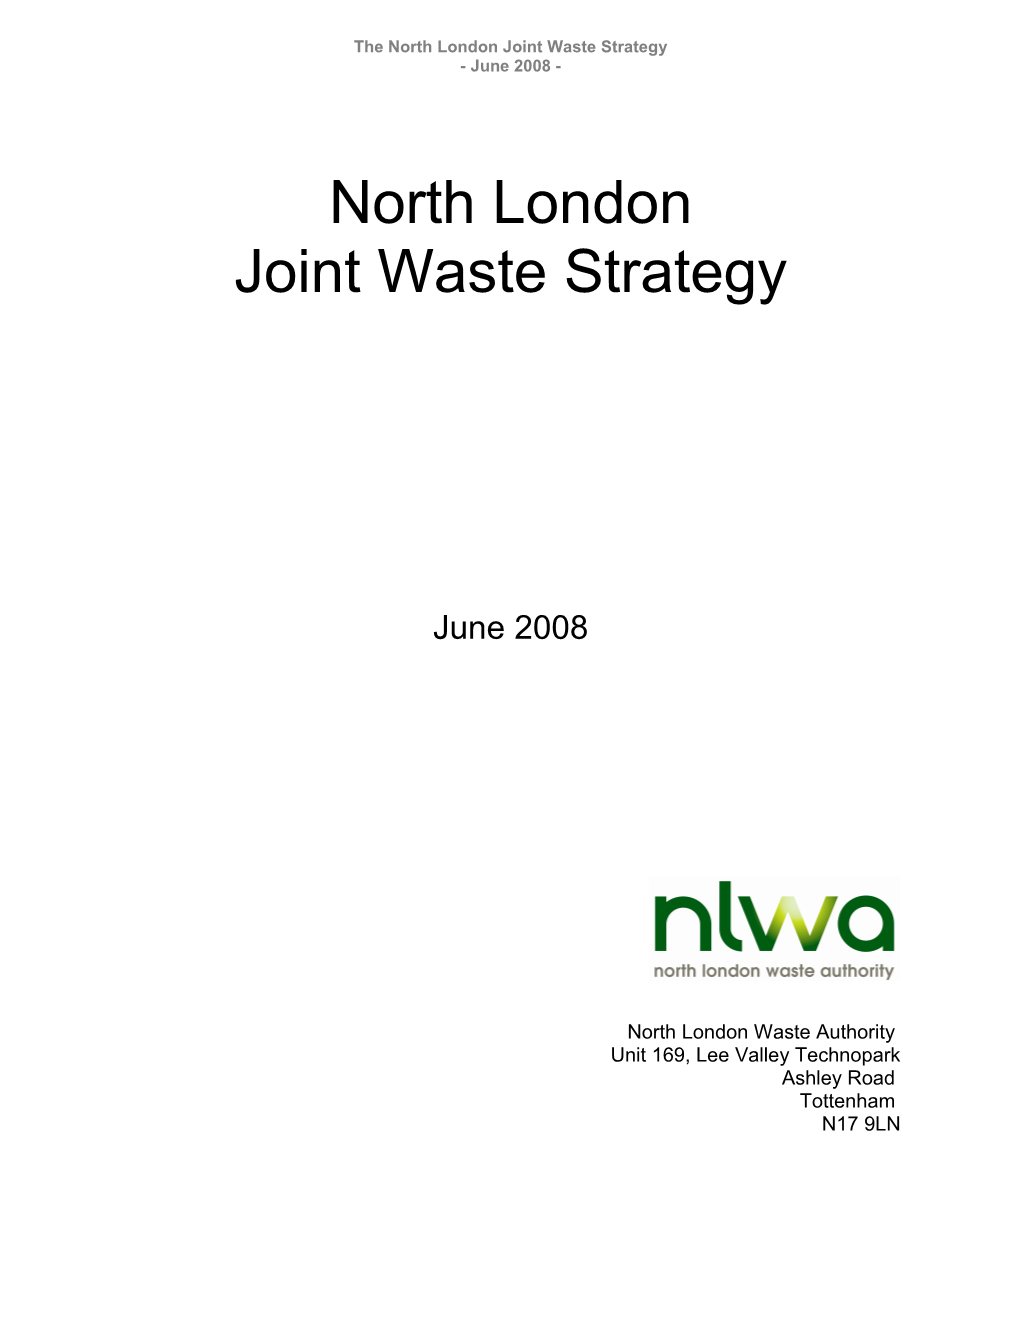 The North London Joint Waste Strategy